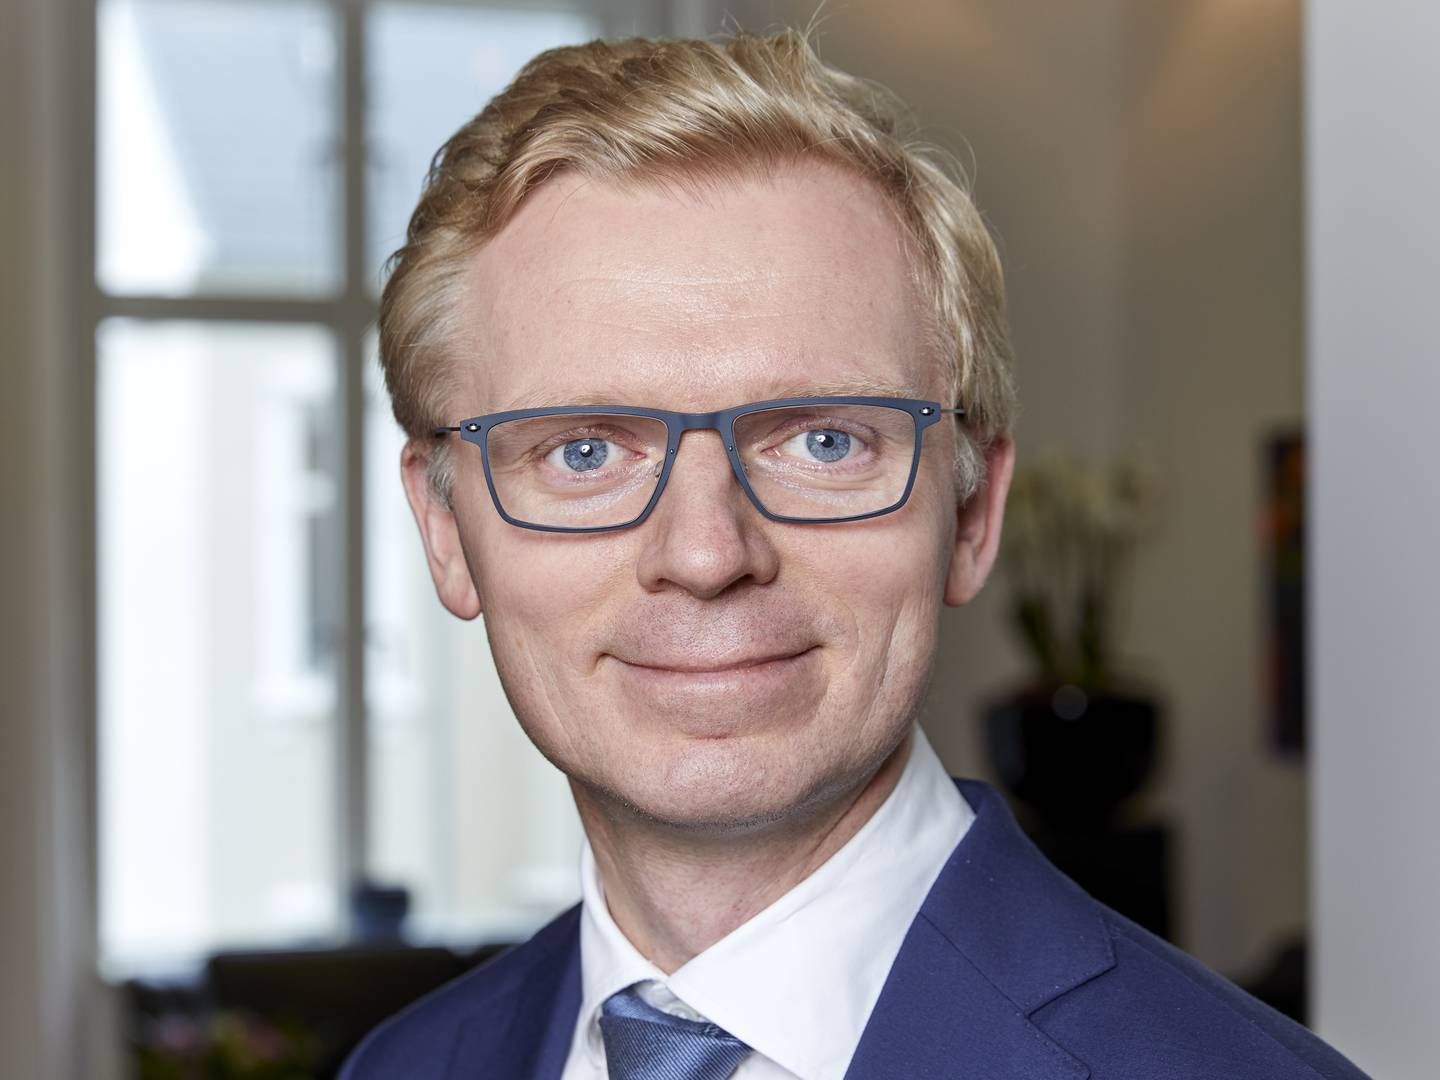 In his time as head of real estate at Industriens Pension, Søren Tang Kristensen has doubled the staff managing the real estate portfolio. New hirings are not unrealistic, he says. | Photo: PR / Industriens Pension